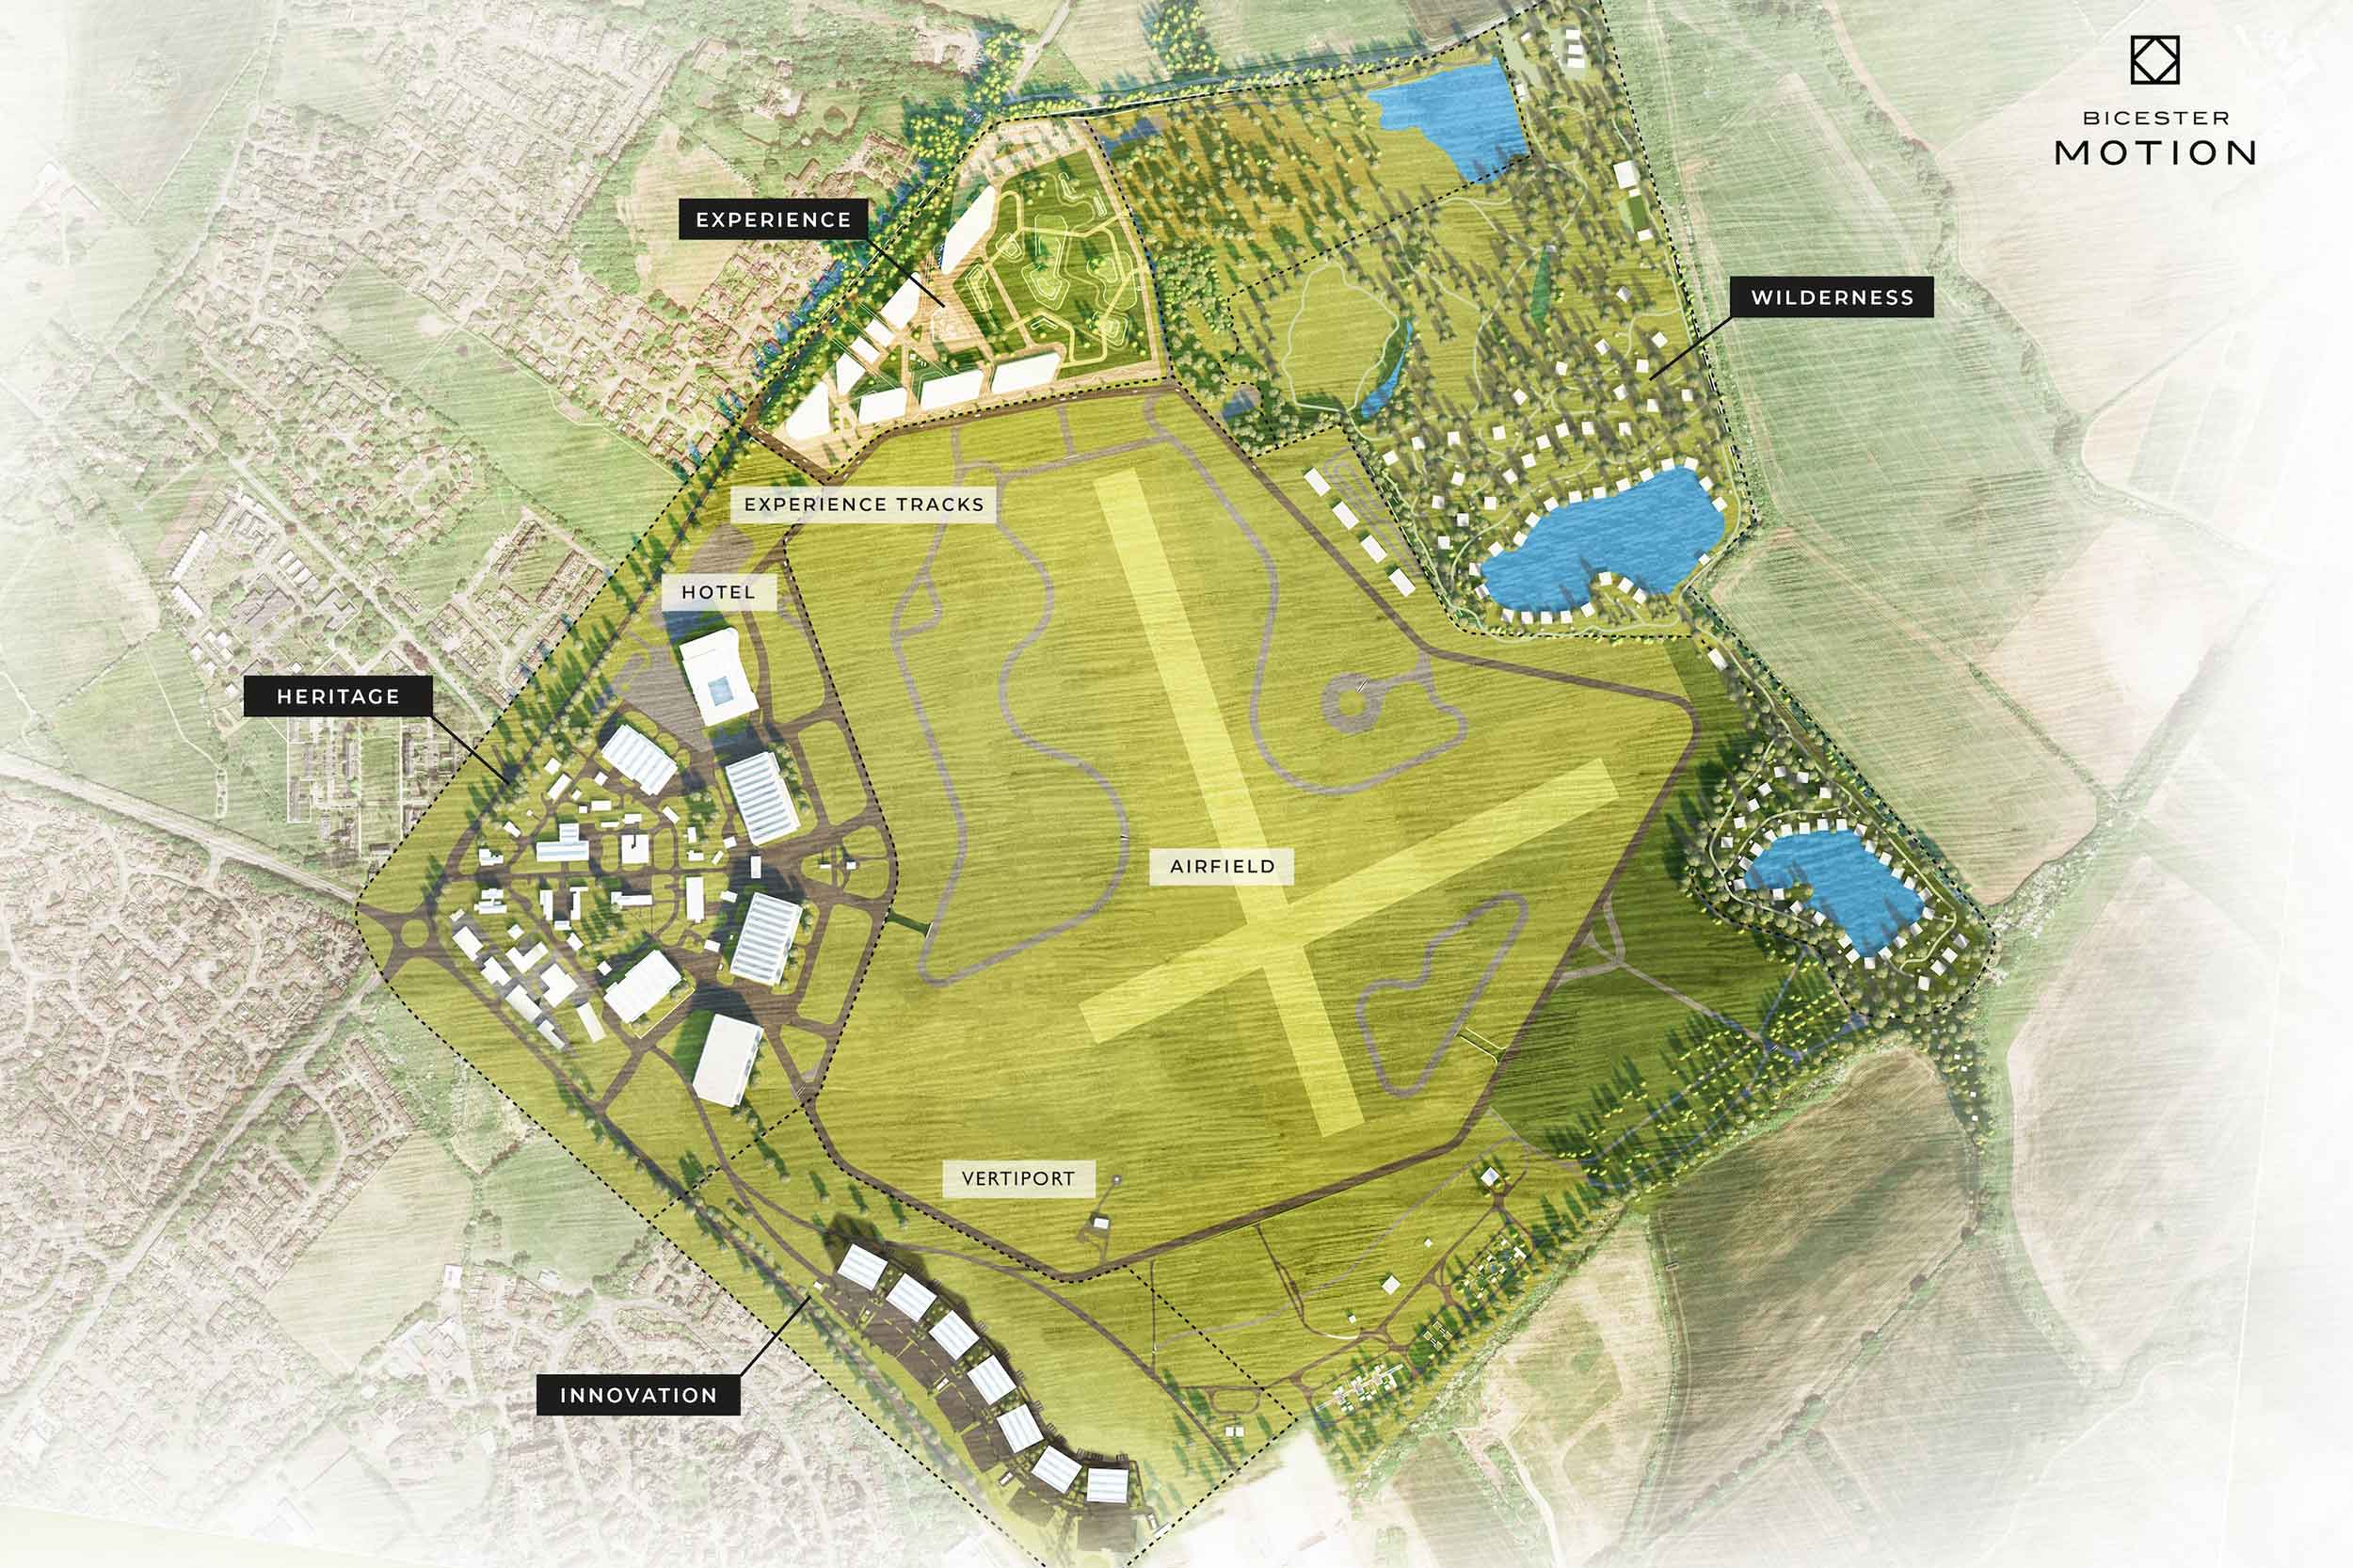 The whole Bicester Motion site with the vertiport in the southern corner of the airfield